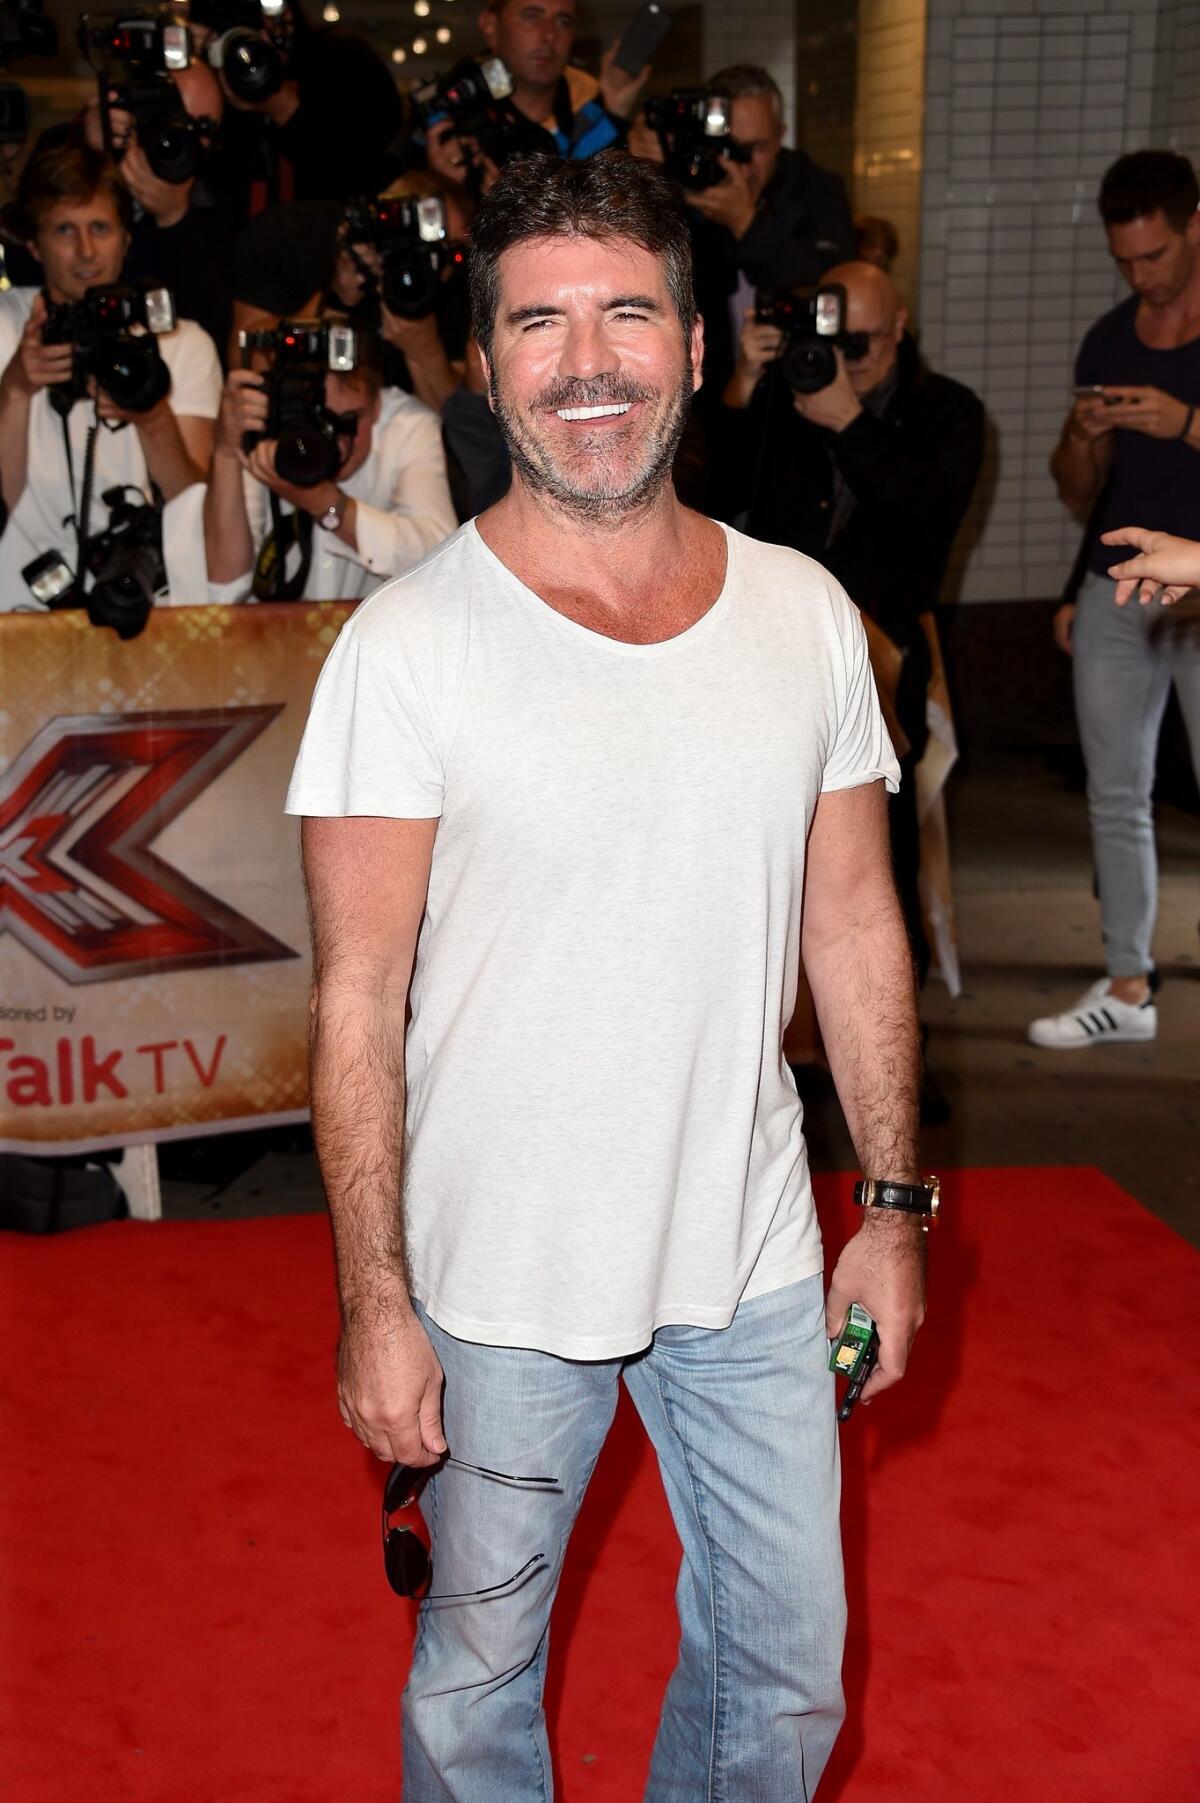 Simon Cowell at the media launch of "The X Factor" in August in London.